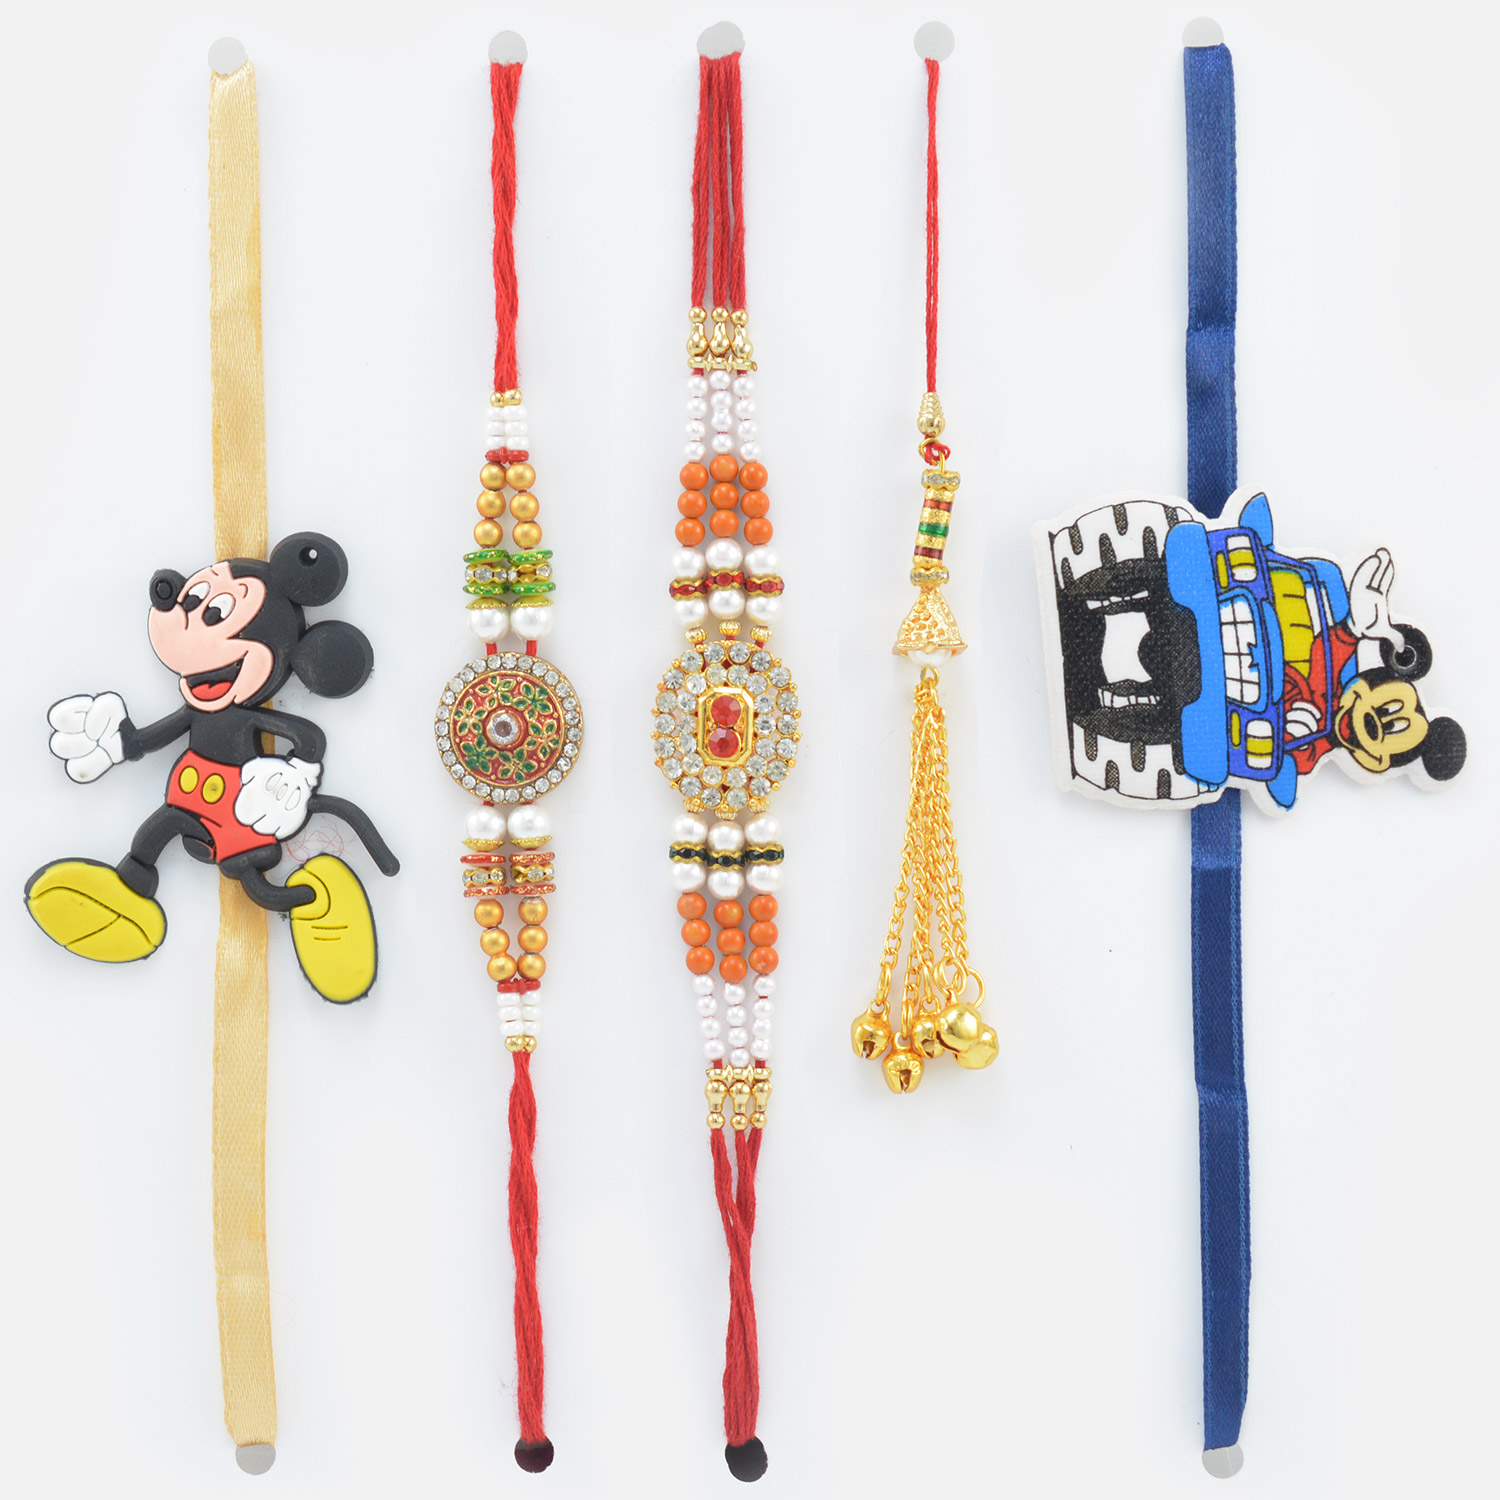 2 Mickey Mouse Character Kid Rakhis with 2 Brother and 1 Lumba Rakhis